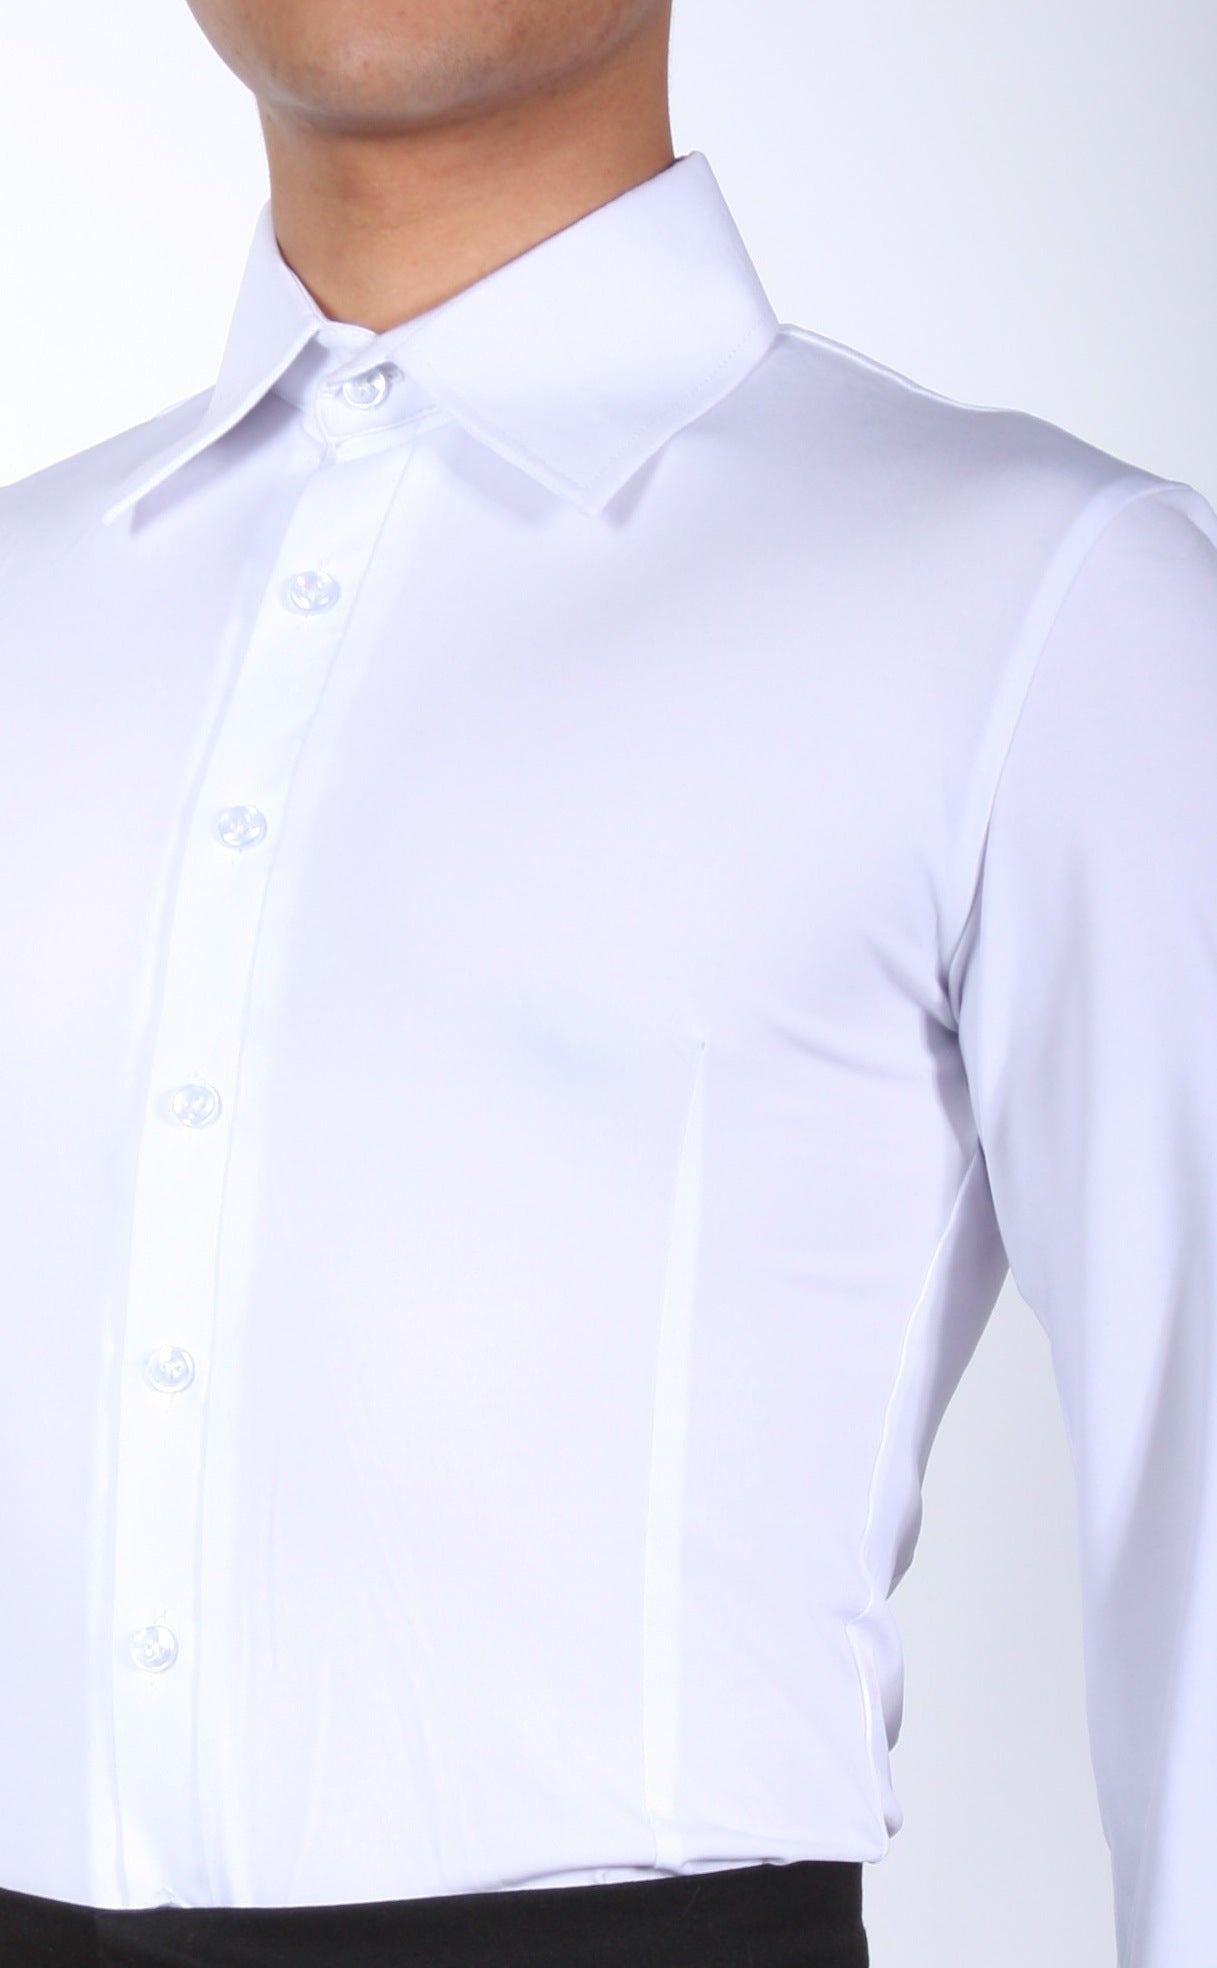 Men's Black or White Smooth Ballroom Button Down Shirt with Built-in Briefs and Collar M018 in Stock